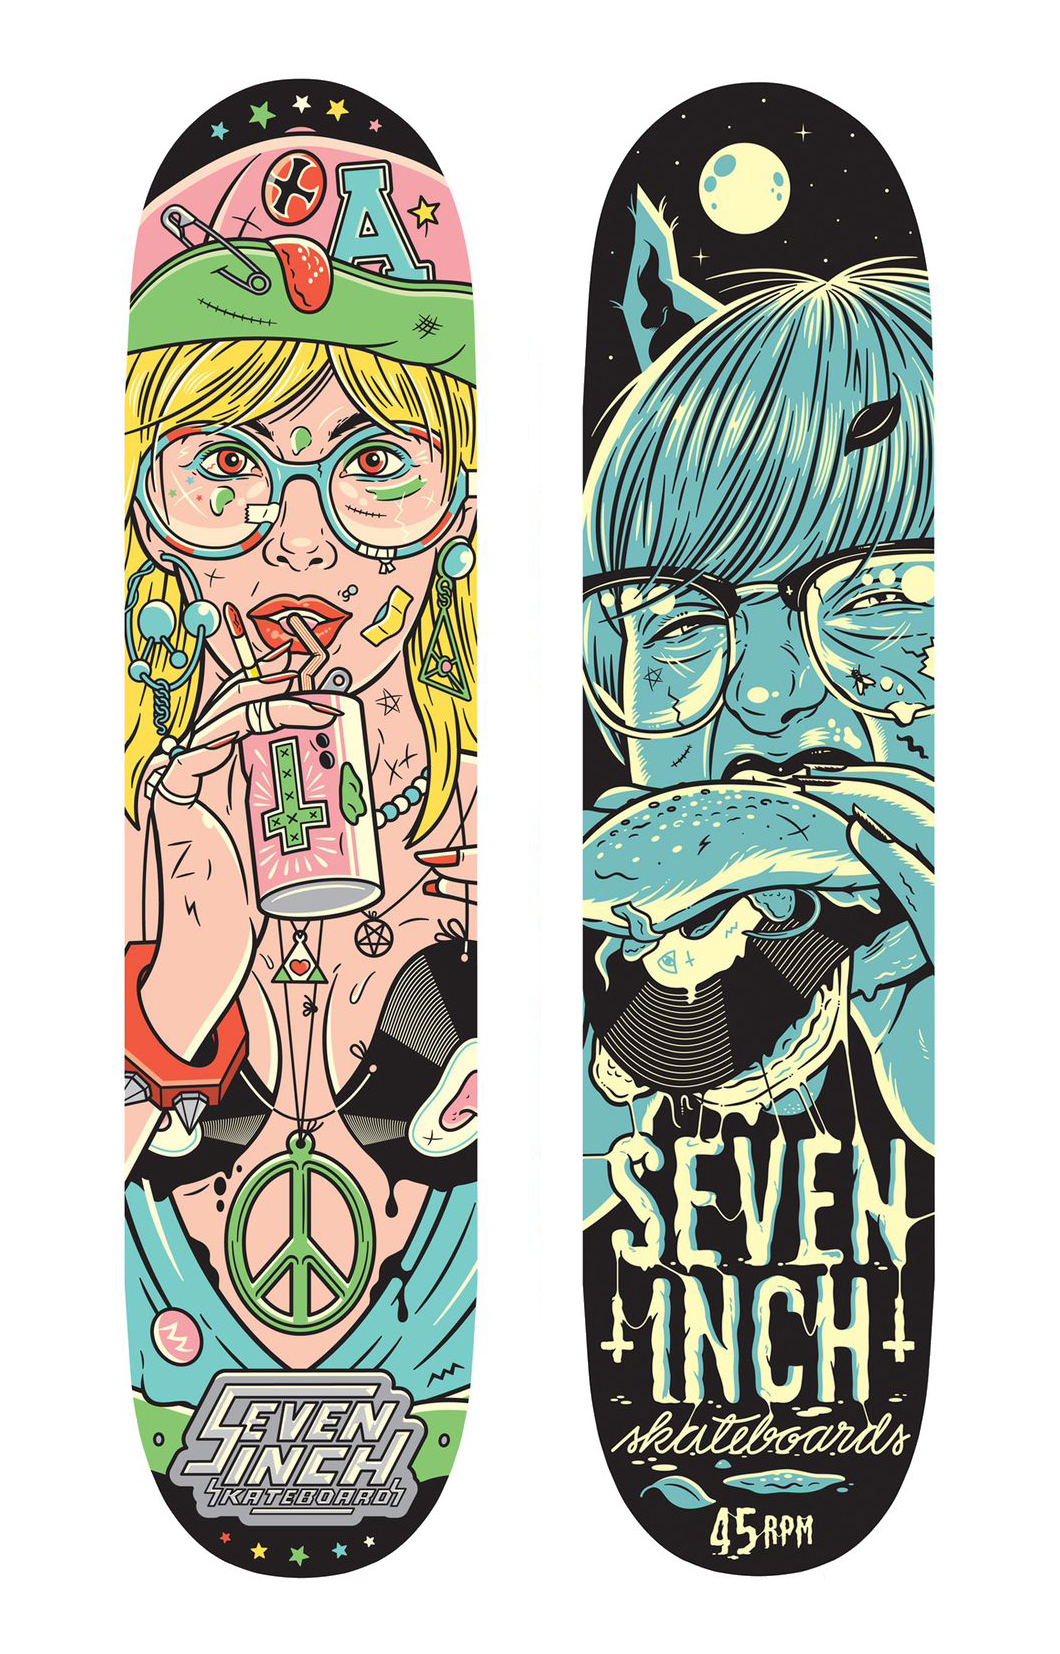 “Girl with glasses” skateboard decks made by Rami Niemi for Seven Inch Skateboards